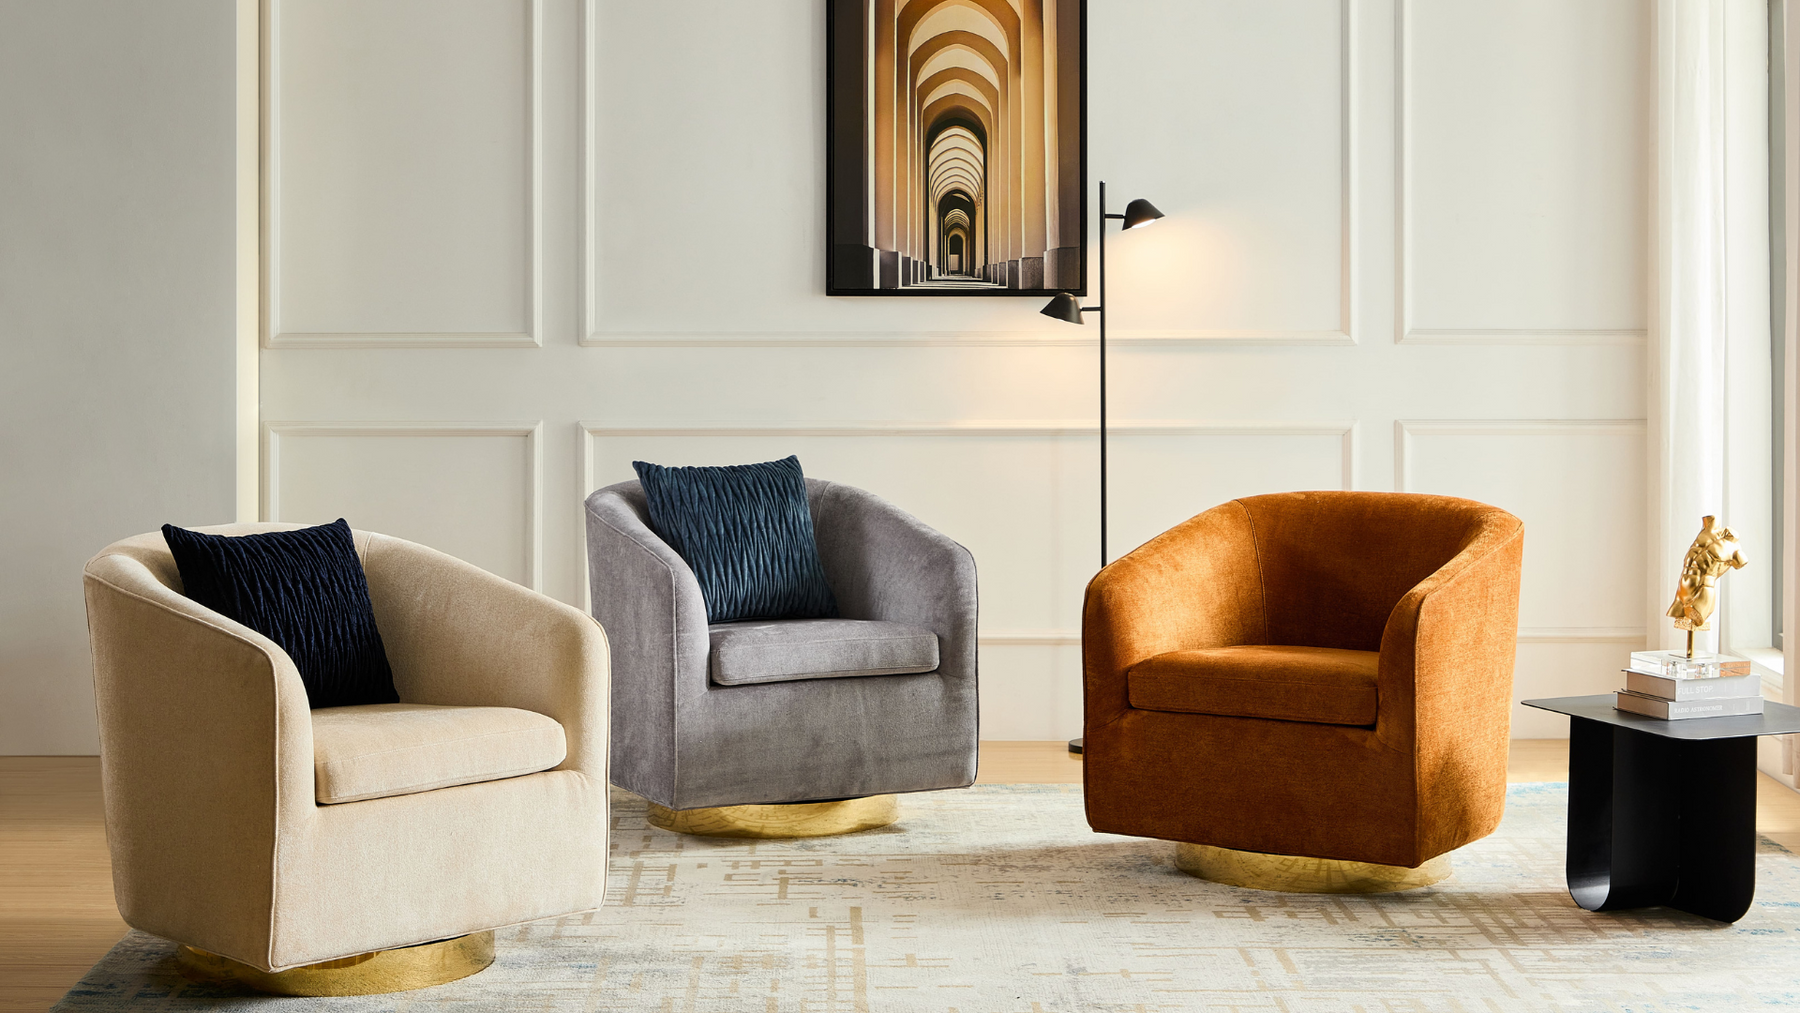 CharlotteTub Swivel Armchair Grey, Ivory and Copper in a Room Setting